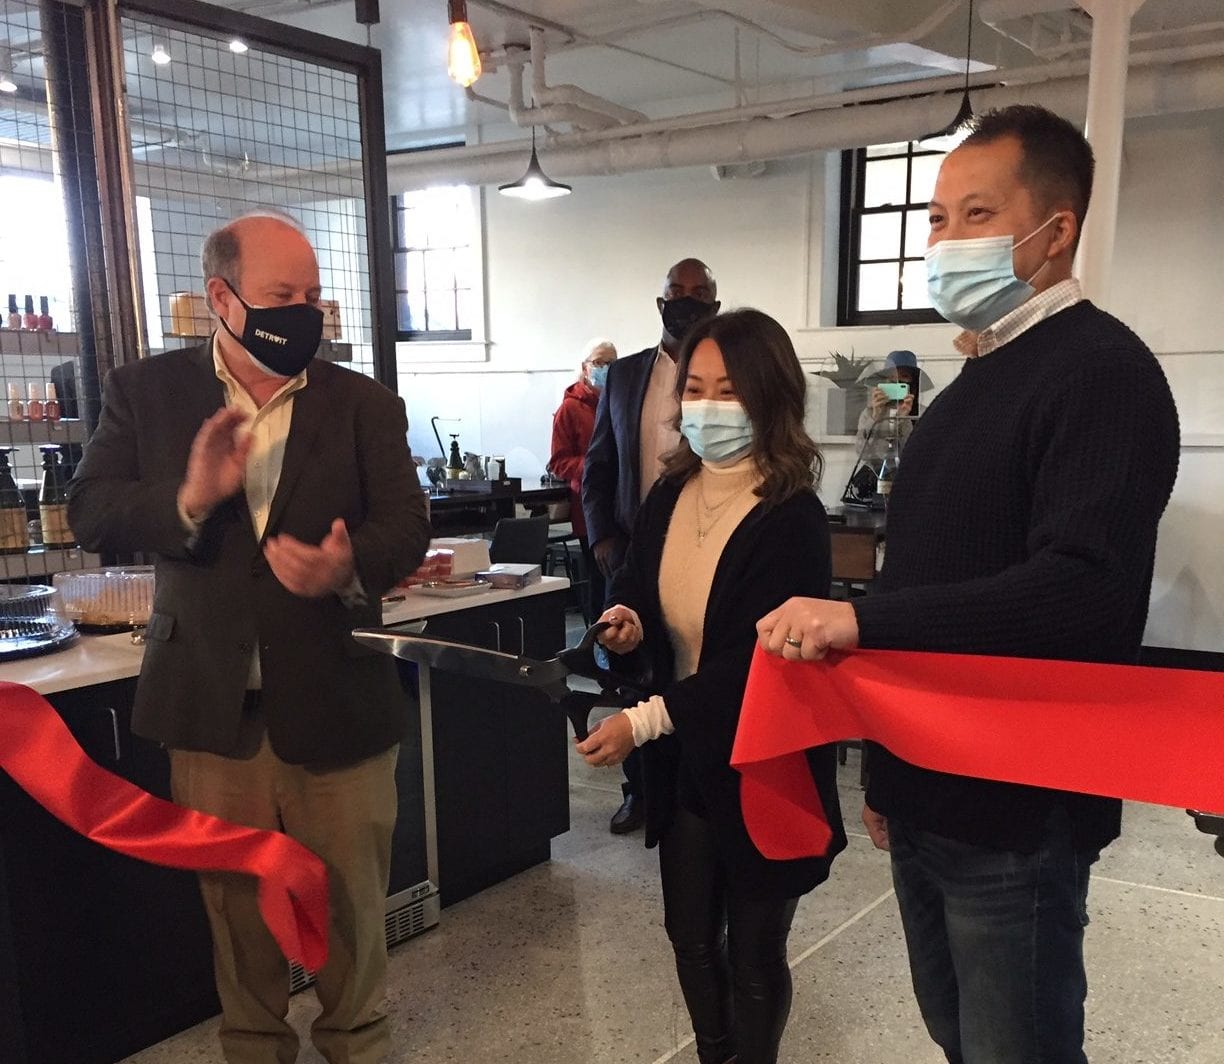 Owner cutting ribbon at ceremony